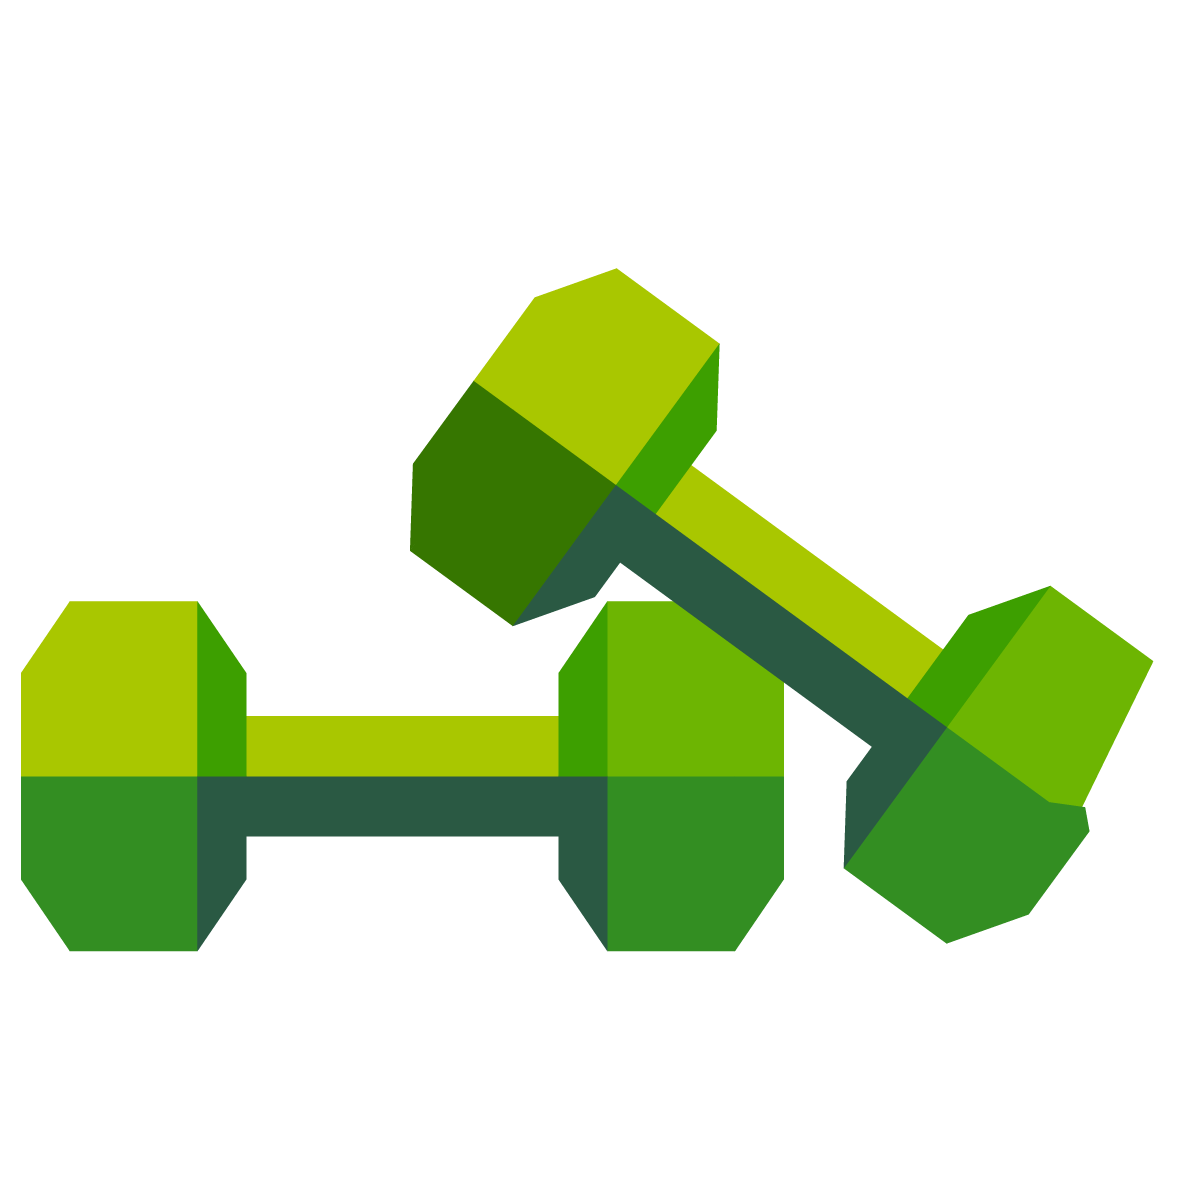 Dumbbell clipart personal fitness. Physical bodybuilding icon flat